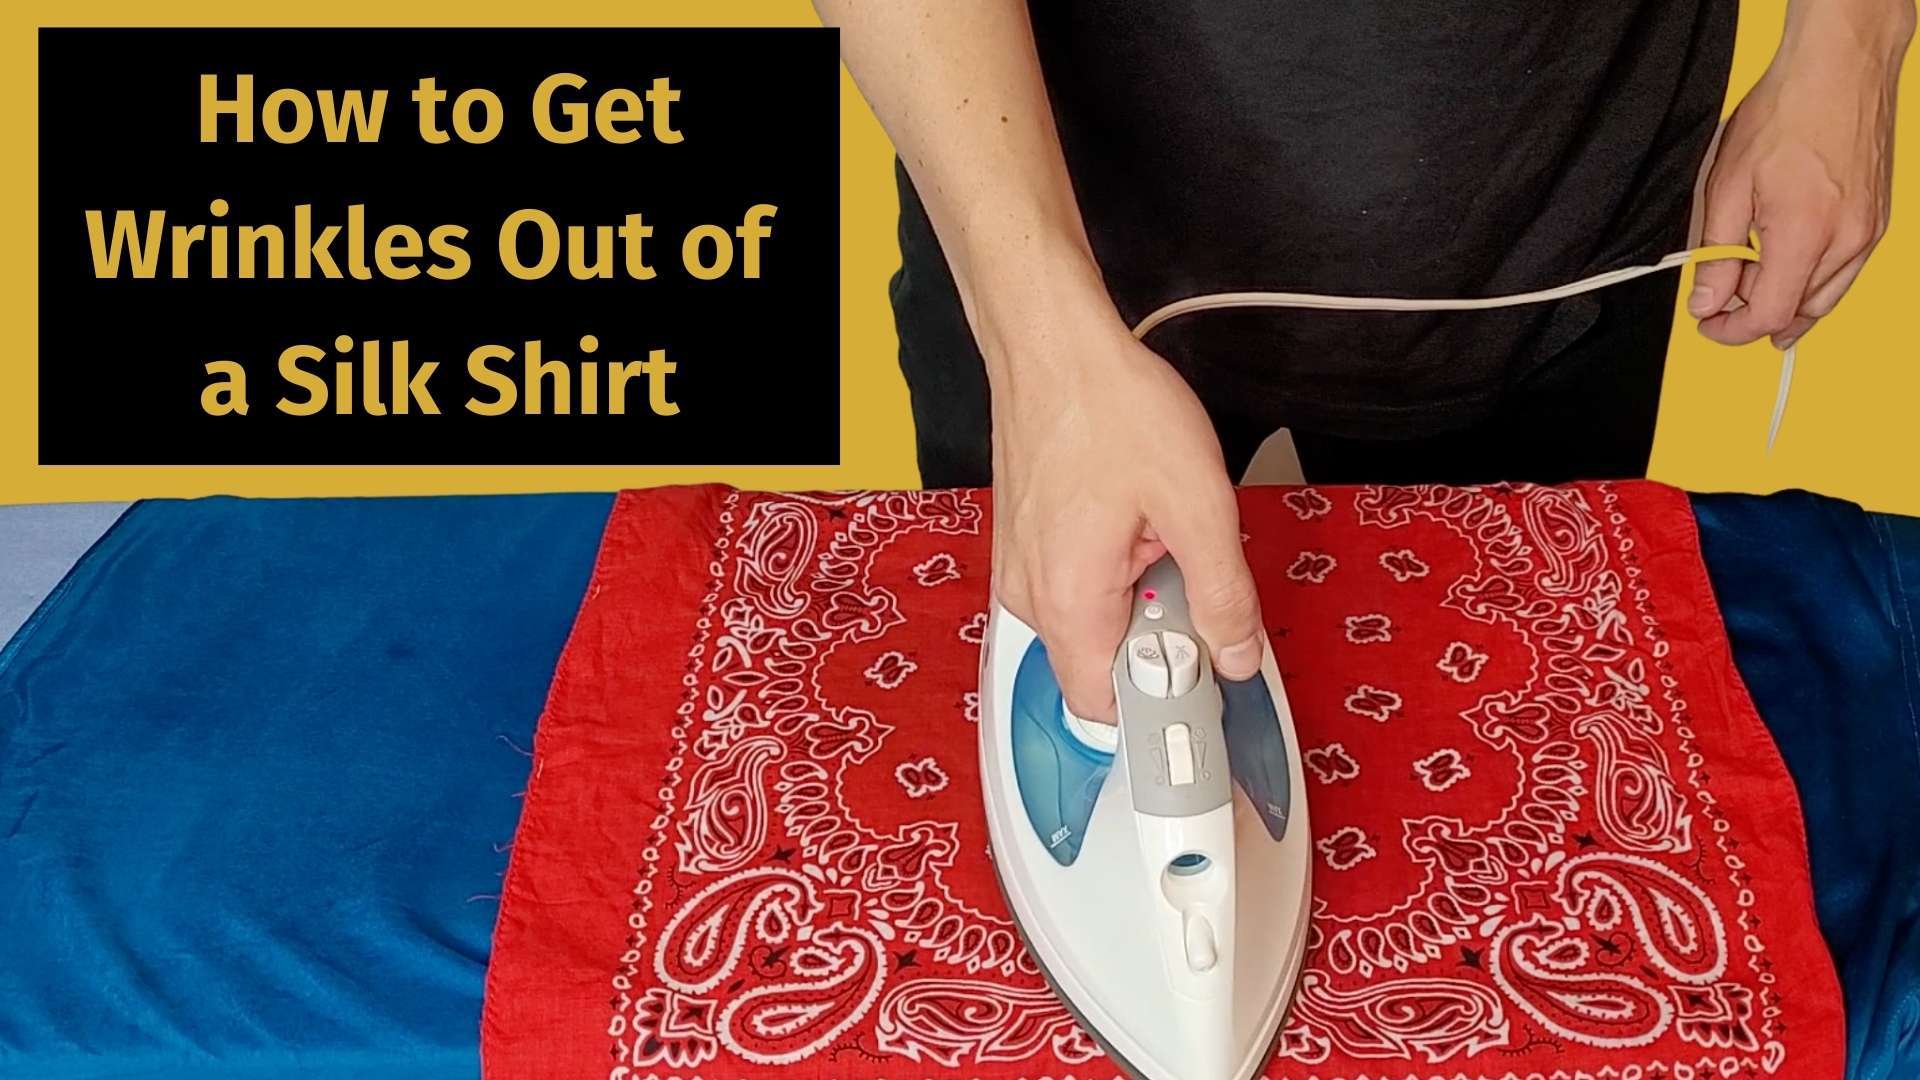 how to get wrinkles out of a silk shirt banner image with a picture of a man ironing a silk shirt on an ironing board